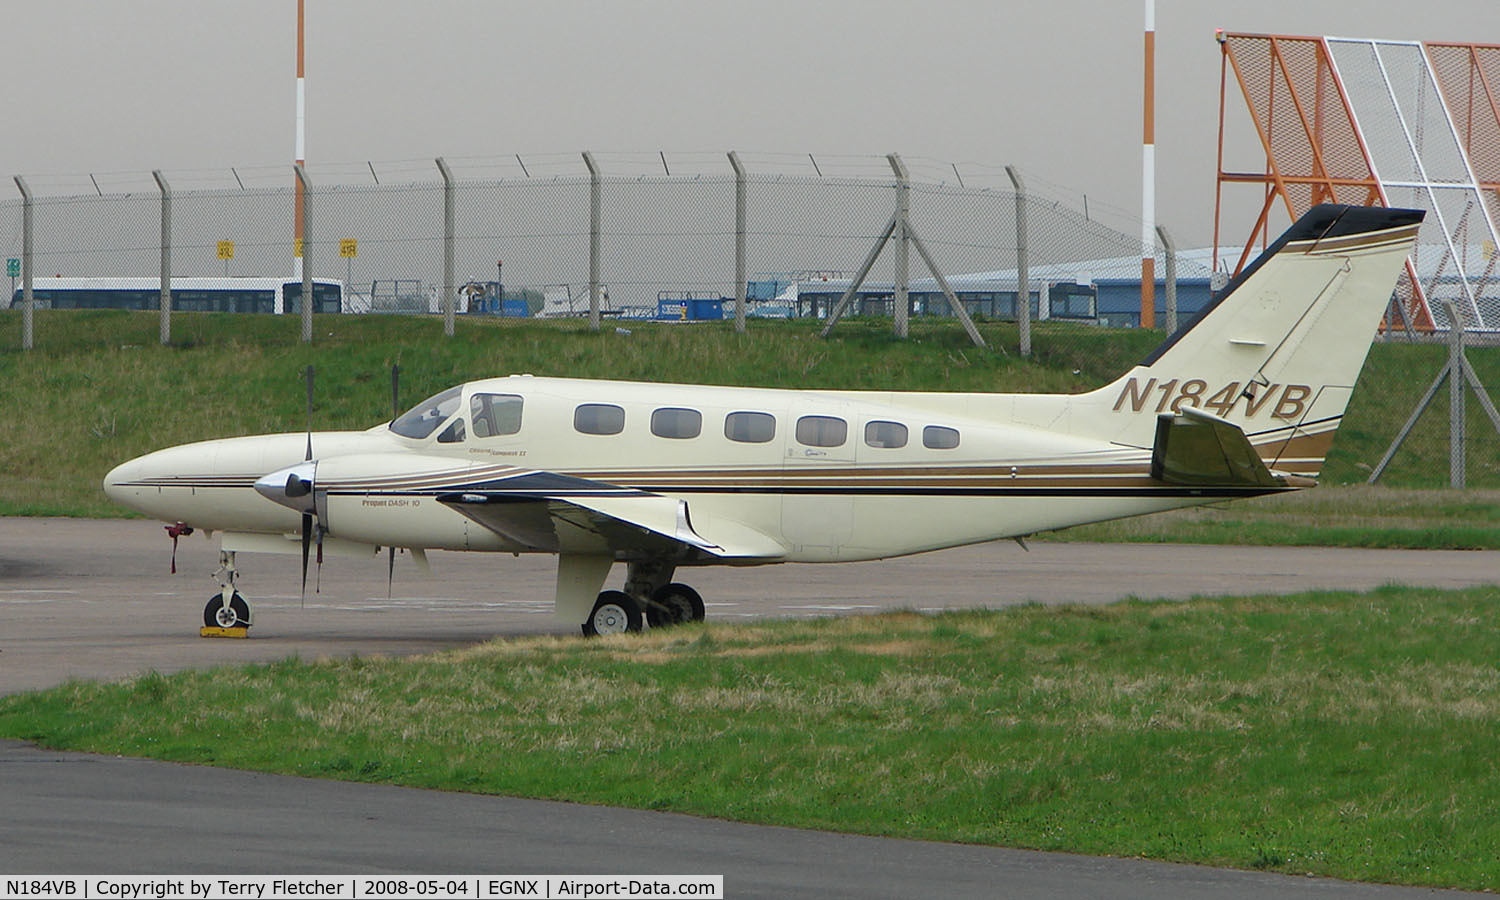 N184VB, 1980 Cessna 441 Conquest II C/N 441-0184, Cessna 441 Conquest at East Midlands in May 2008